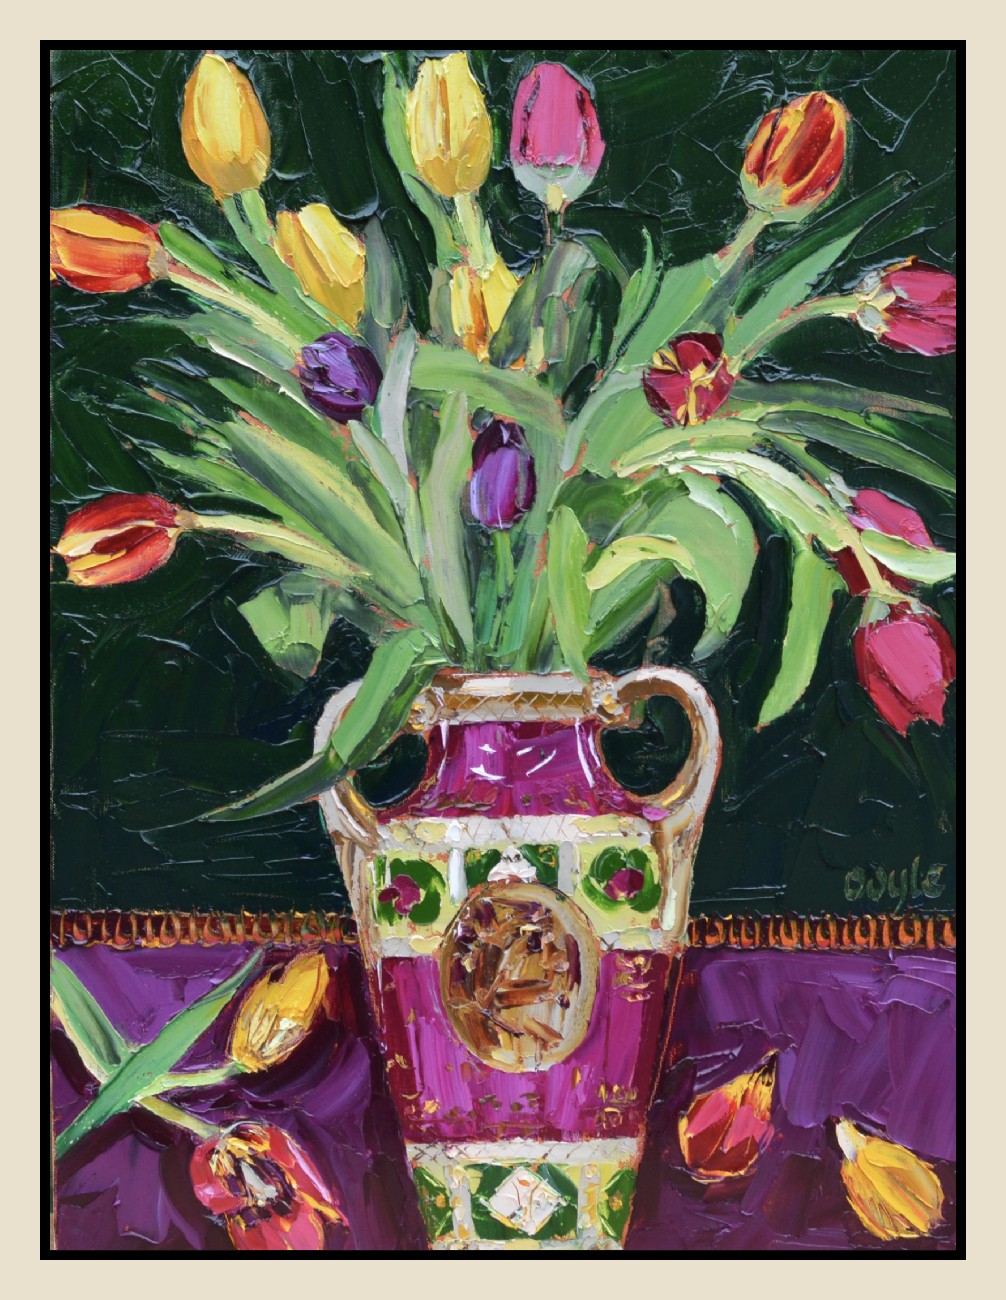 Mixed Tulips by Lucy Doyle